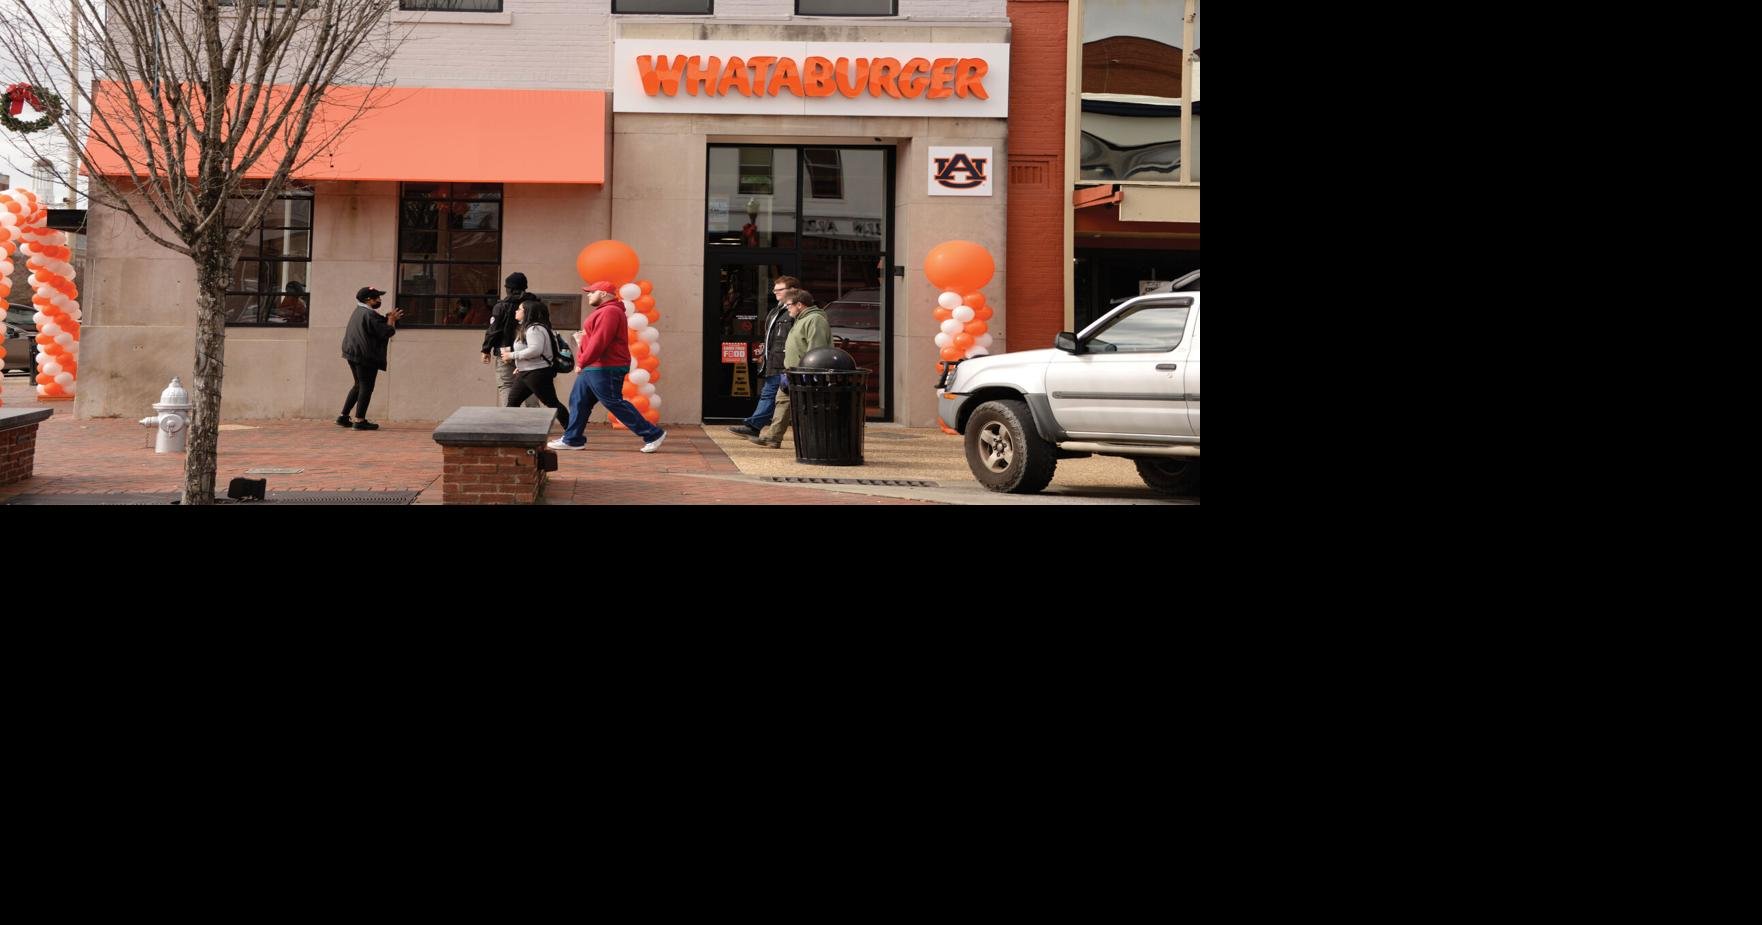 Whataburger Opening This Summer in Clarksville